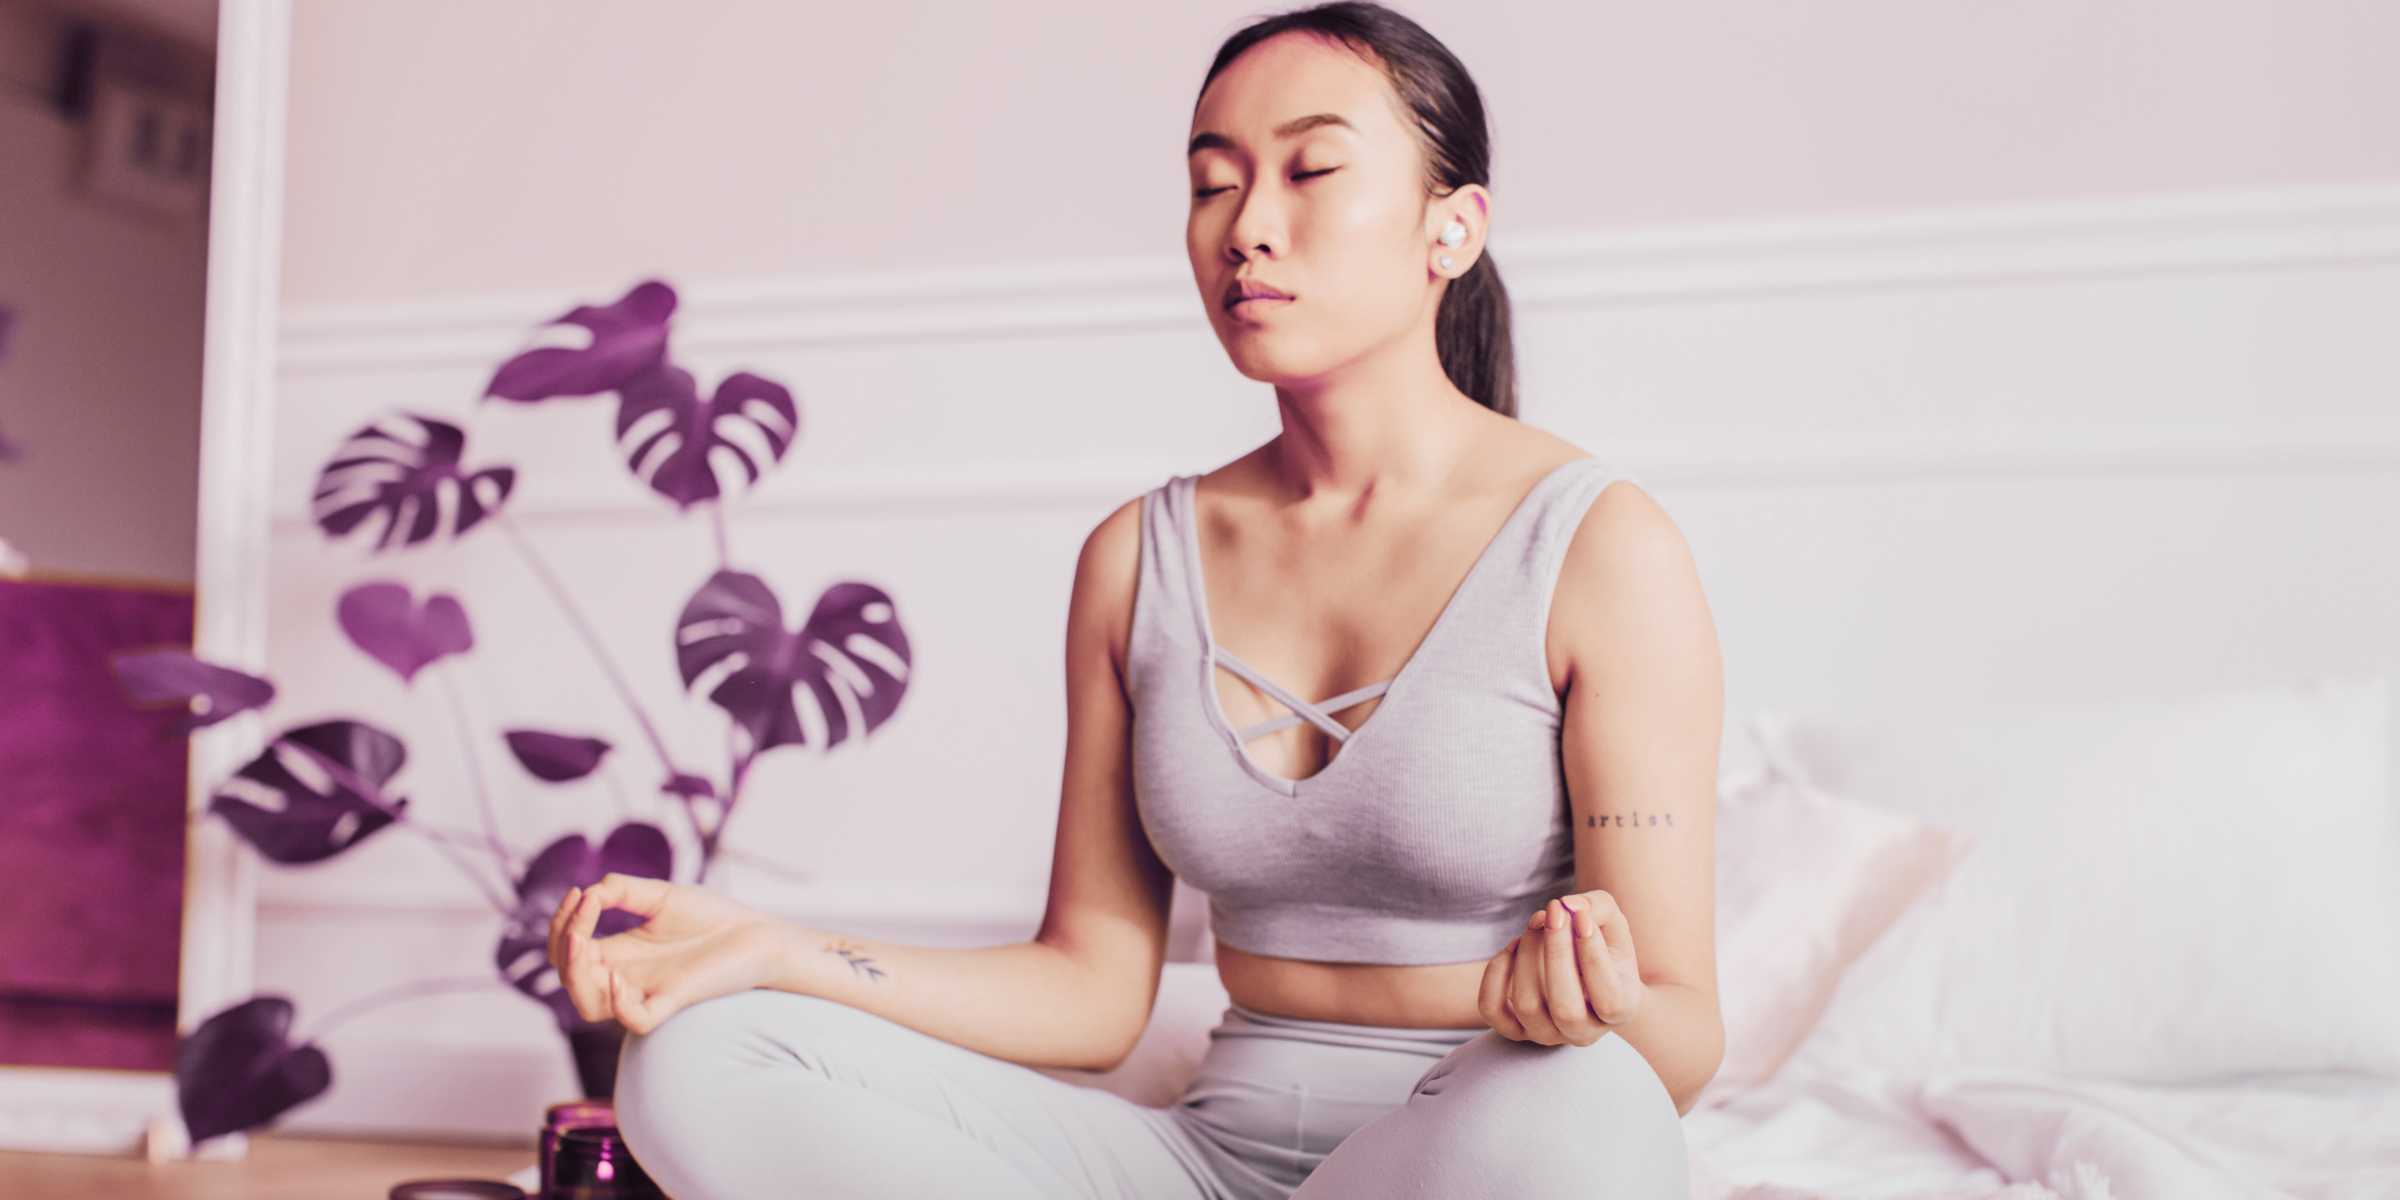 young asian woman in bedroom meditating for stress and more youthful appearance